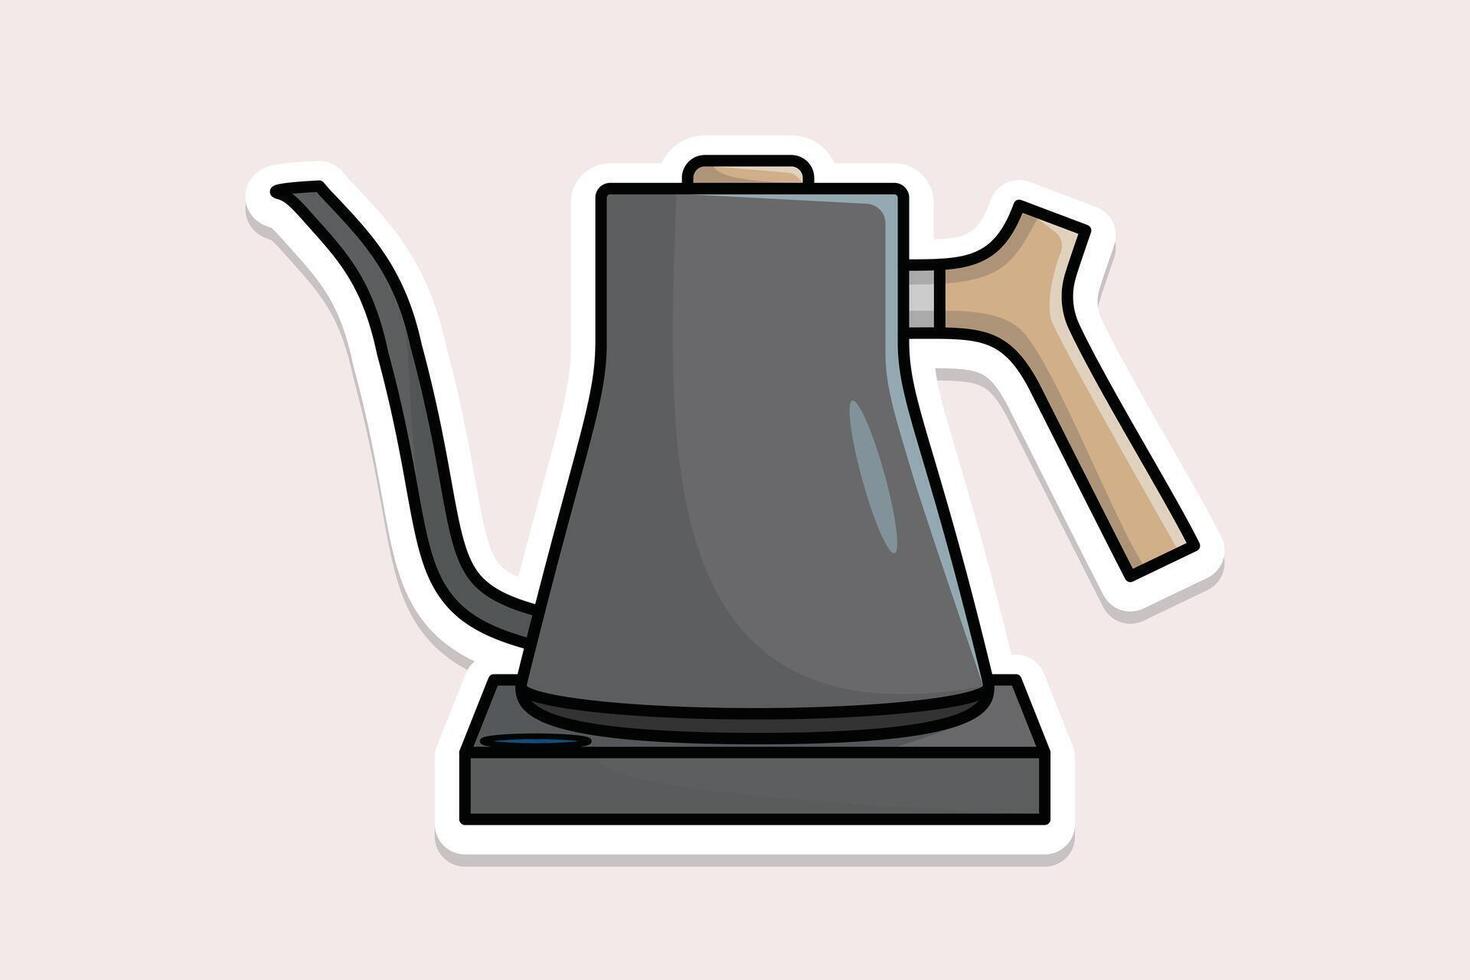 Beautiful Grey Tea Kettle sticker design vector illustration. Kitchen interior object icon concept. Morning Tea Teapot with closed lid sticker design on blue background.